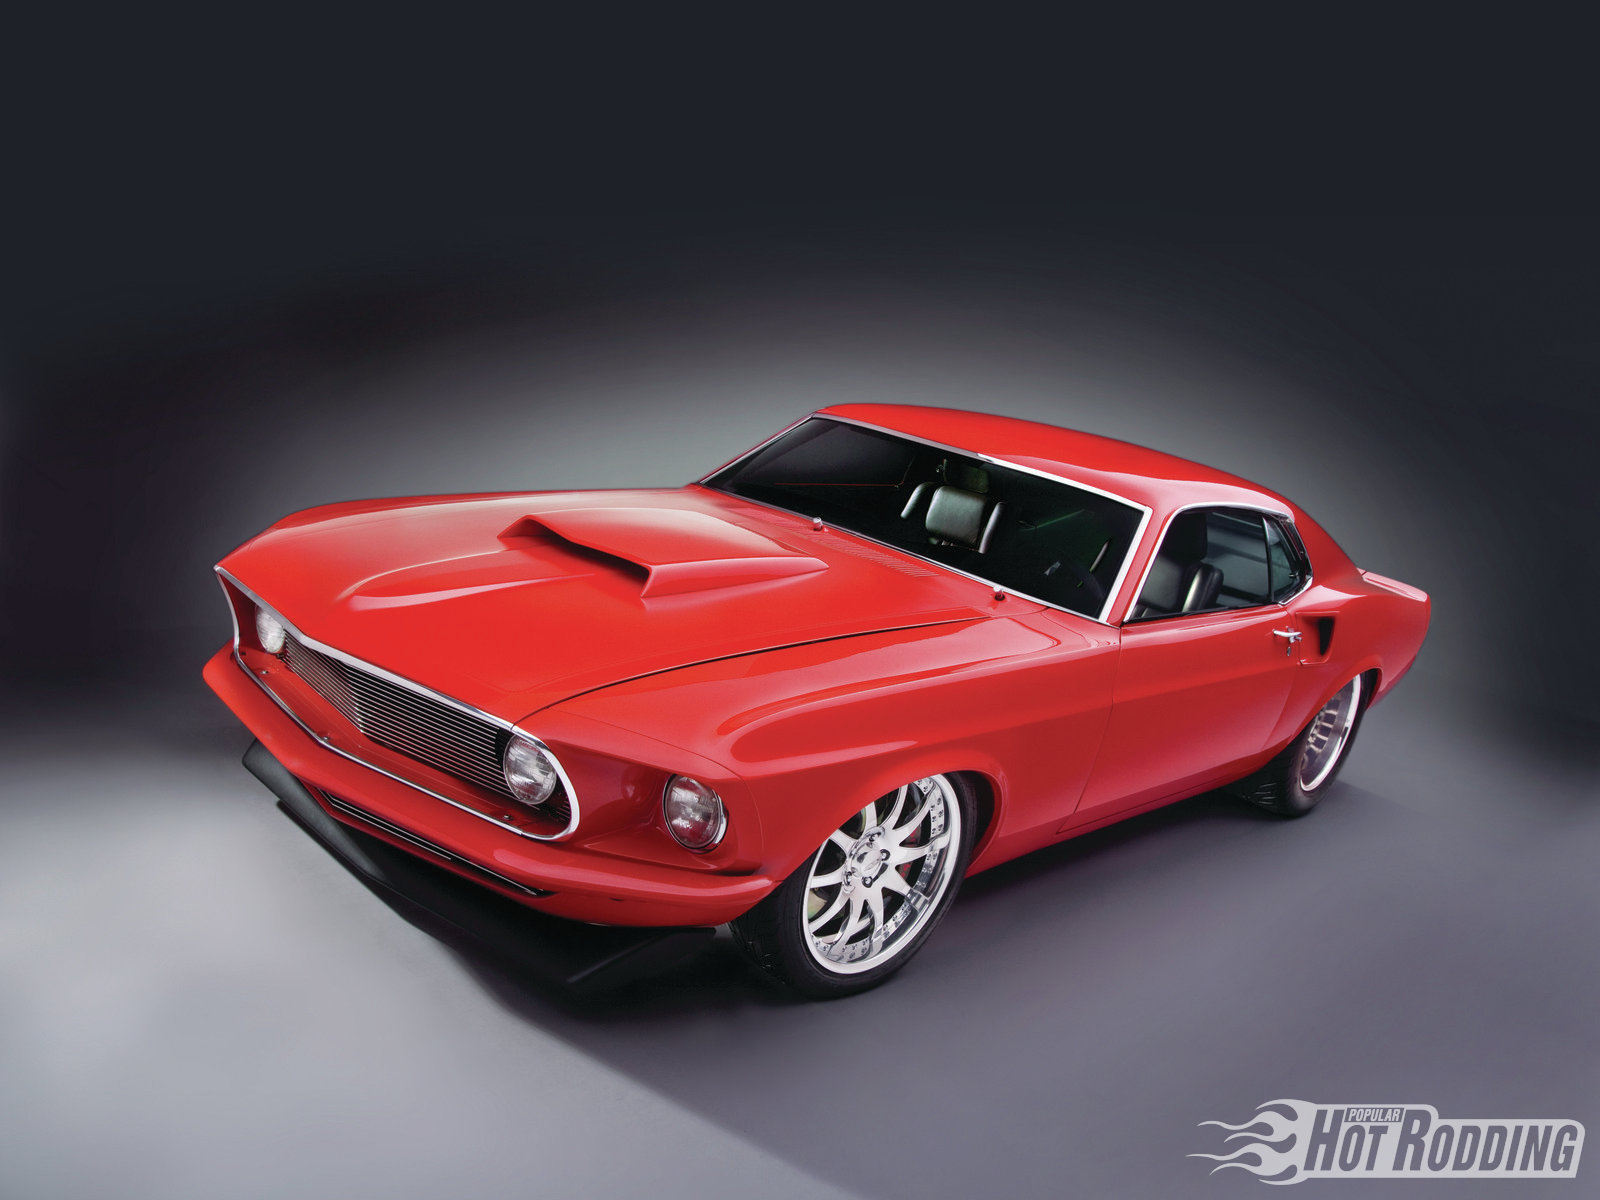 vehicles, ford mustang fastback, classic car, fastback, ford mustang, ford, hot rod, muscle car